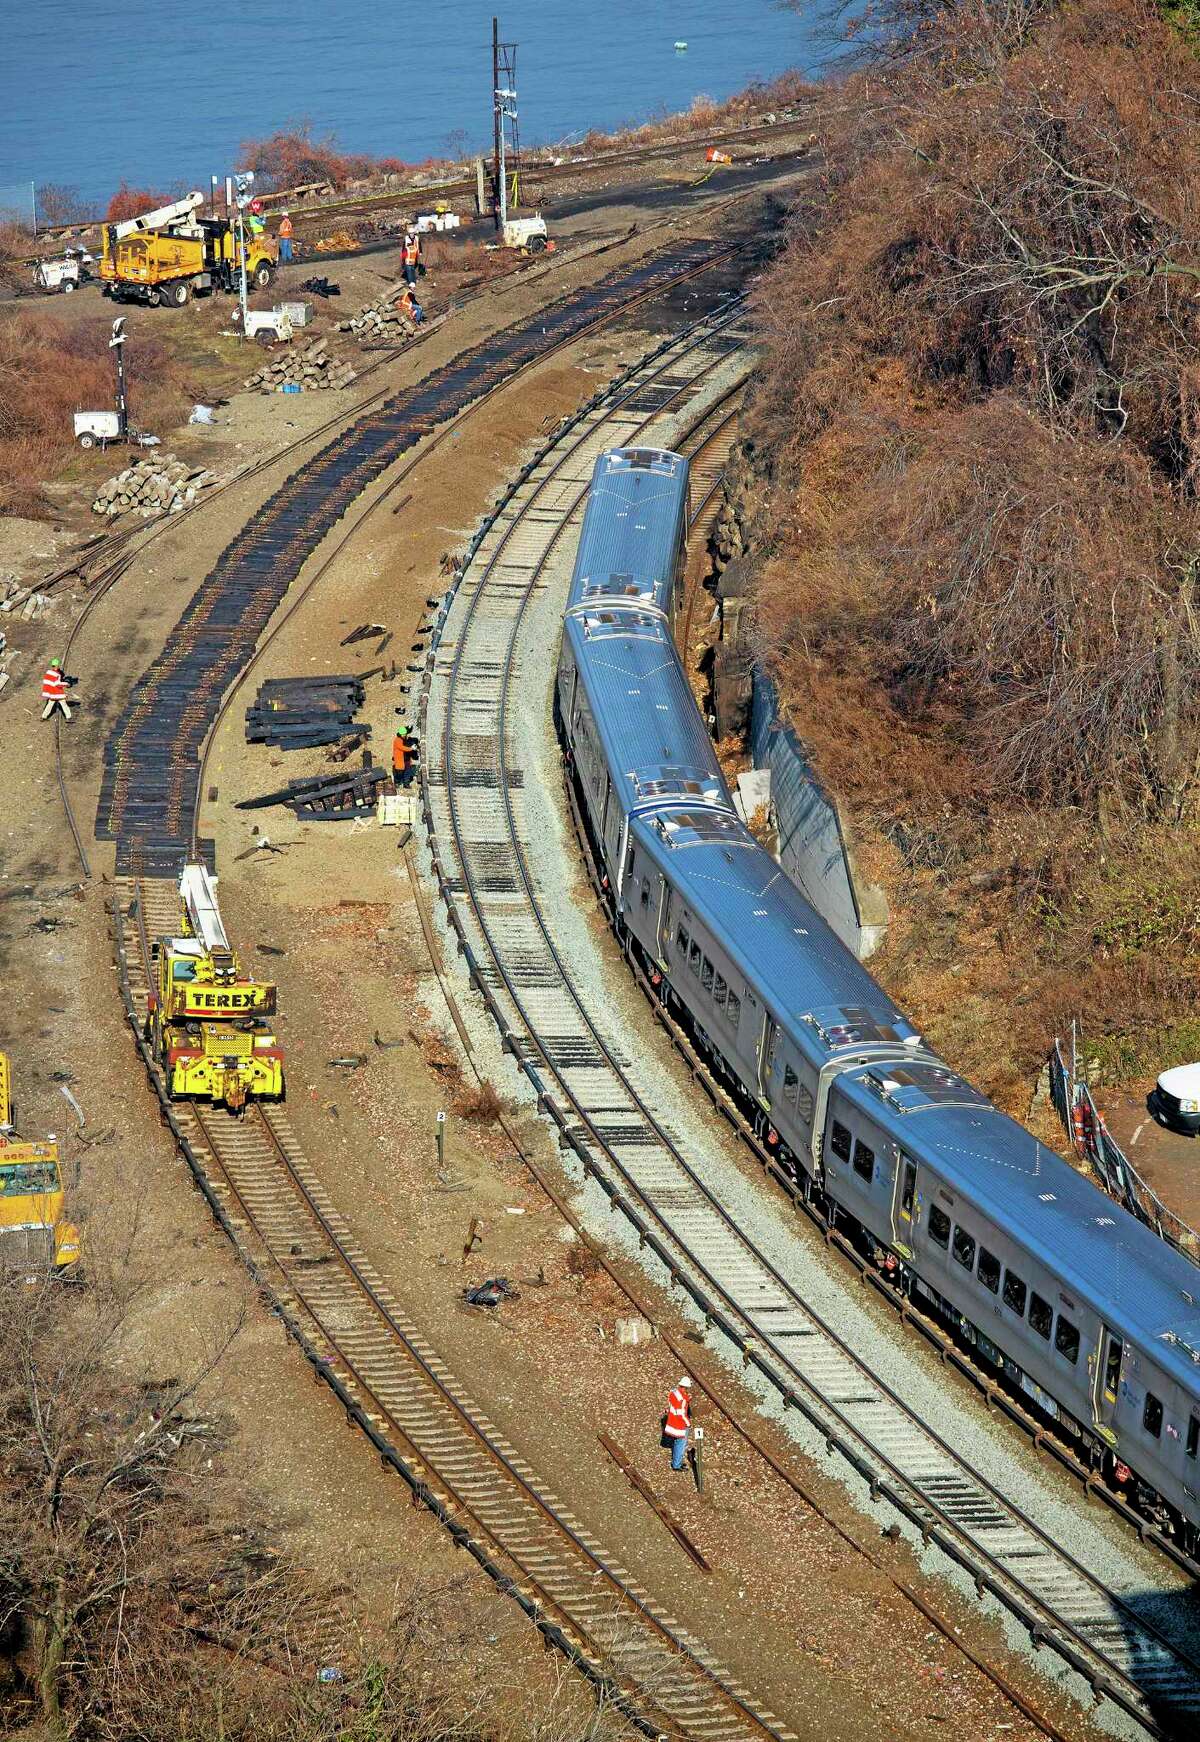 A Metro-North Railroad passenger train pulls out of the Spuyten Duyvil station in the Bronx borough of New York Wednesday, Dec. 4, 2013, as it passes the site of a fatal derailment that disrupted service on the Hudson Line of the railroad Sunday, Dec. 1. (AP Photo/Craig Ruttle)